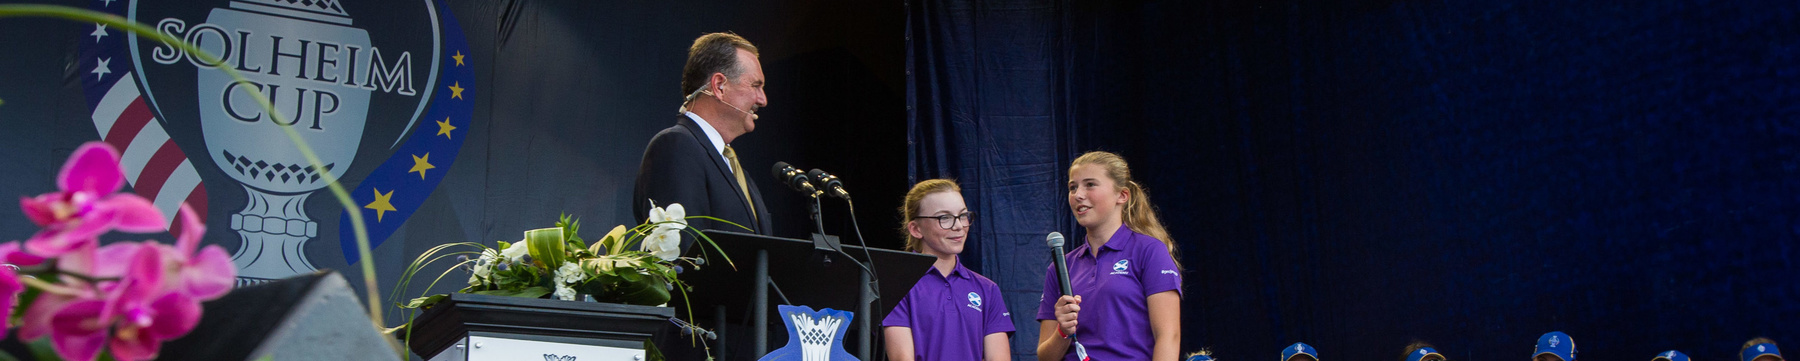 Potential players in the Ping Junior Solheim Cup in 2019 talk to the audience during the closing ceremony